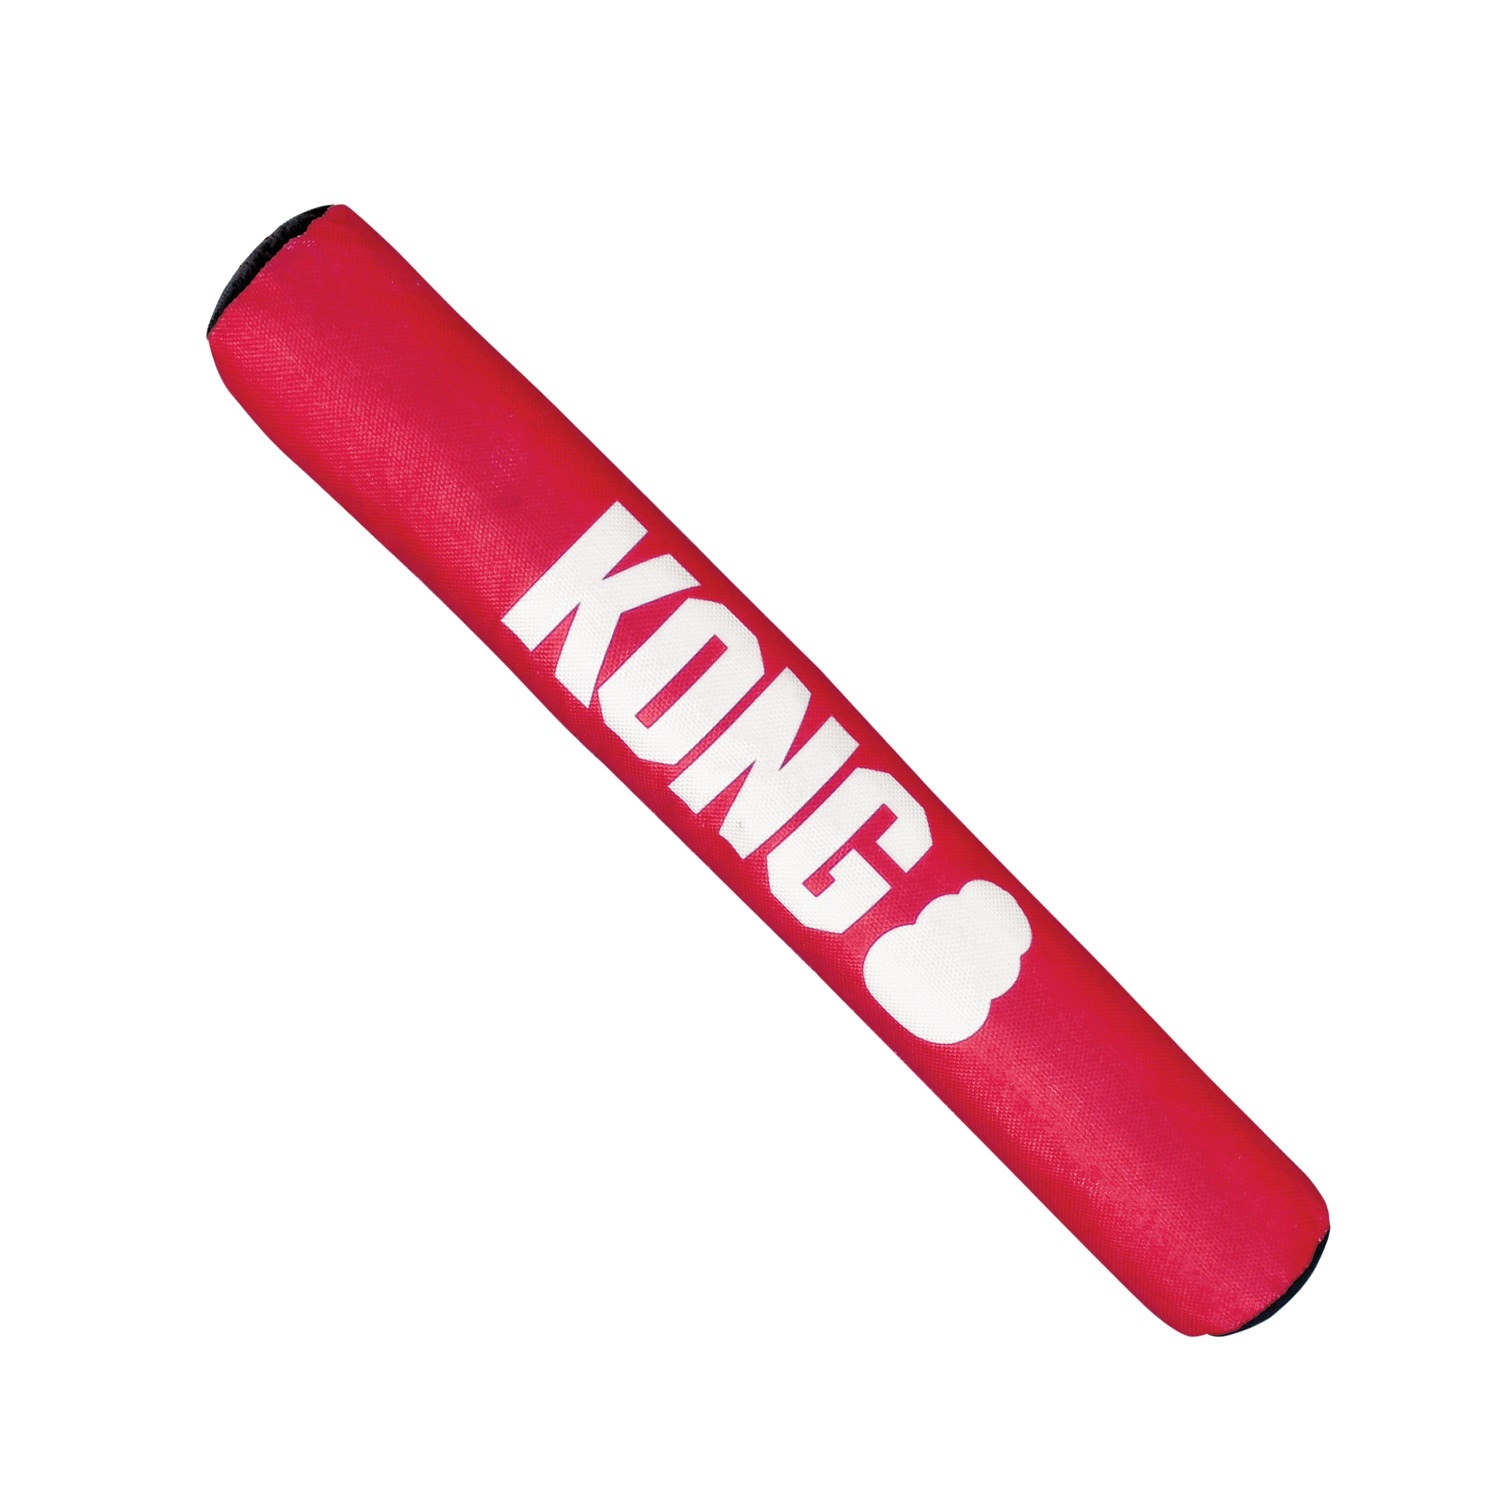 KONG Signature Stick - Safe Fetch Toy with Rattle & Squeak for Dogs - X-Large image 0